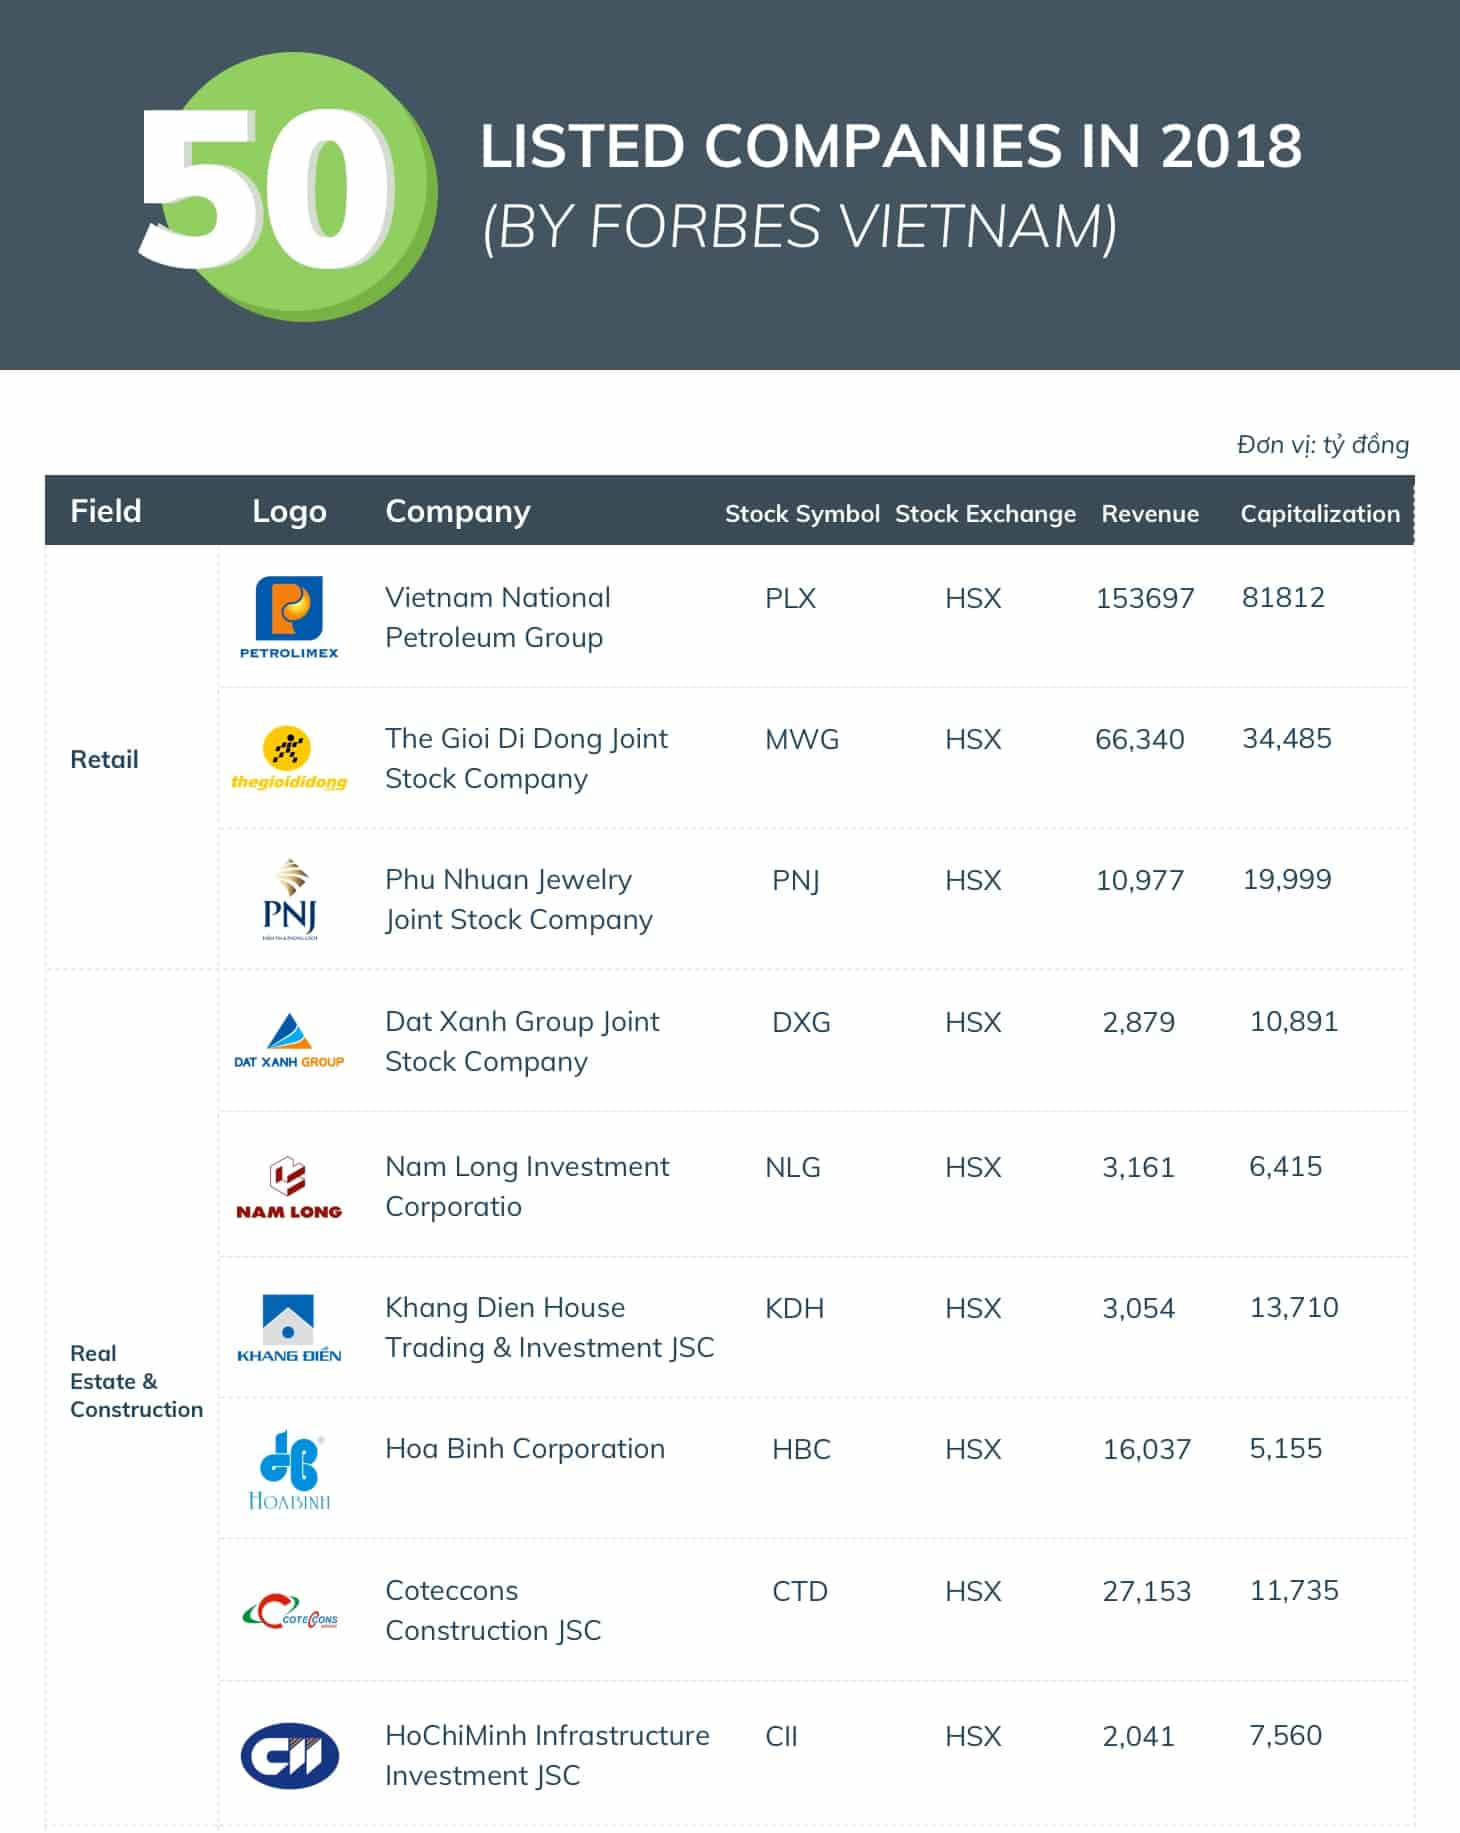 TOP 50 LISTED COMPANIES IN 2018 (BY FORBES VIETNAM)